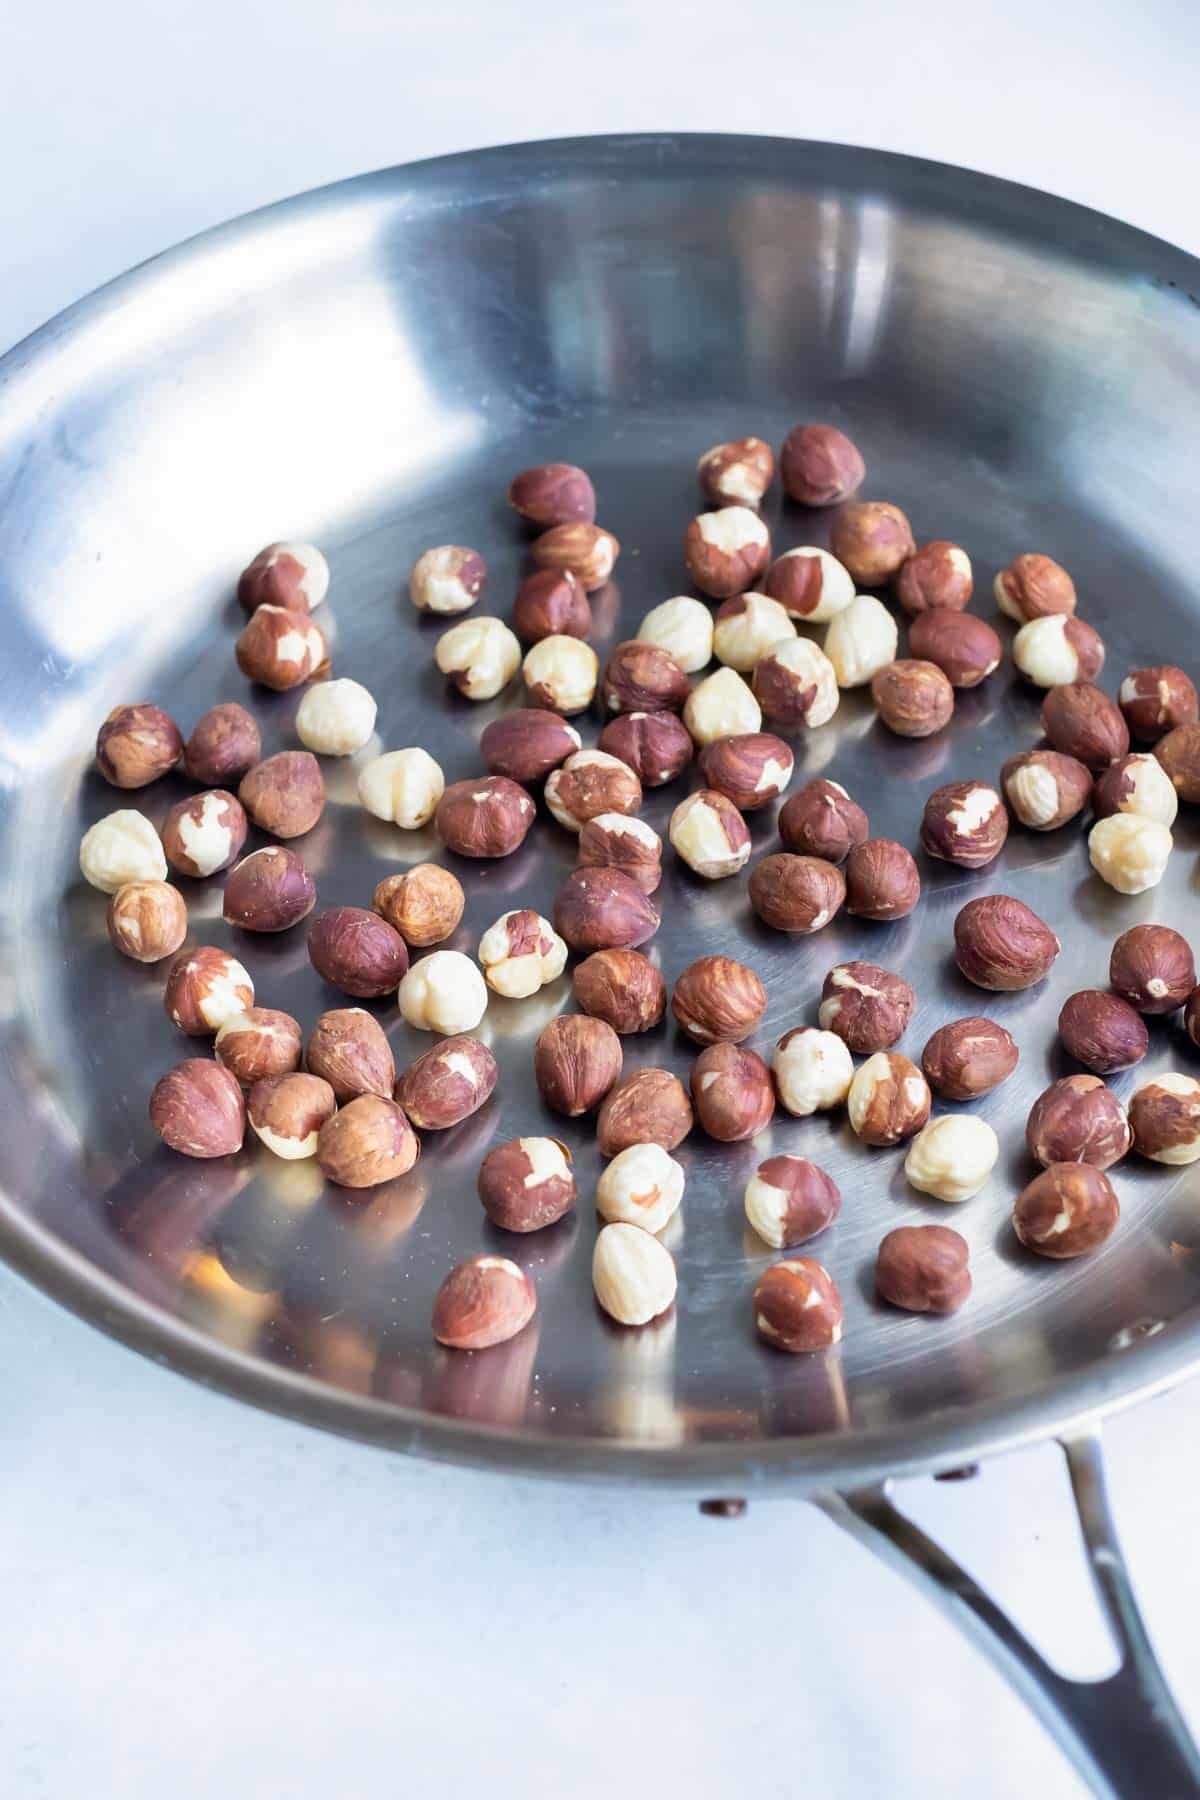 Hazelnuts are roasted in a skillet on the stovetop.